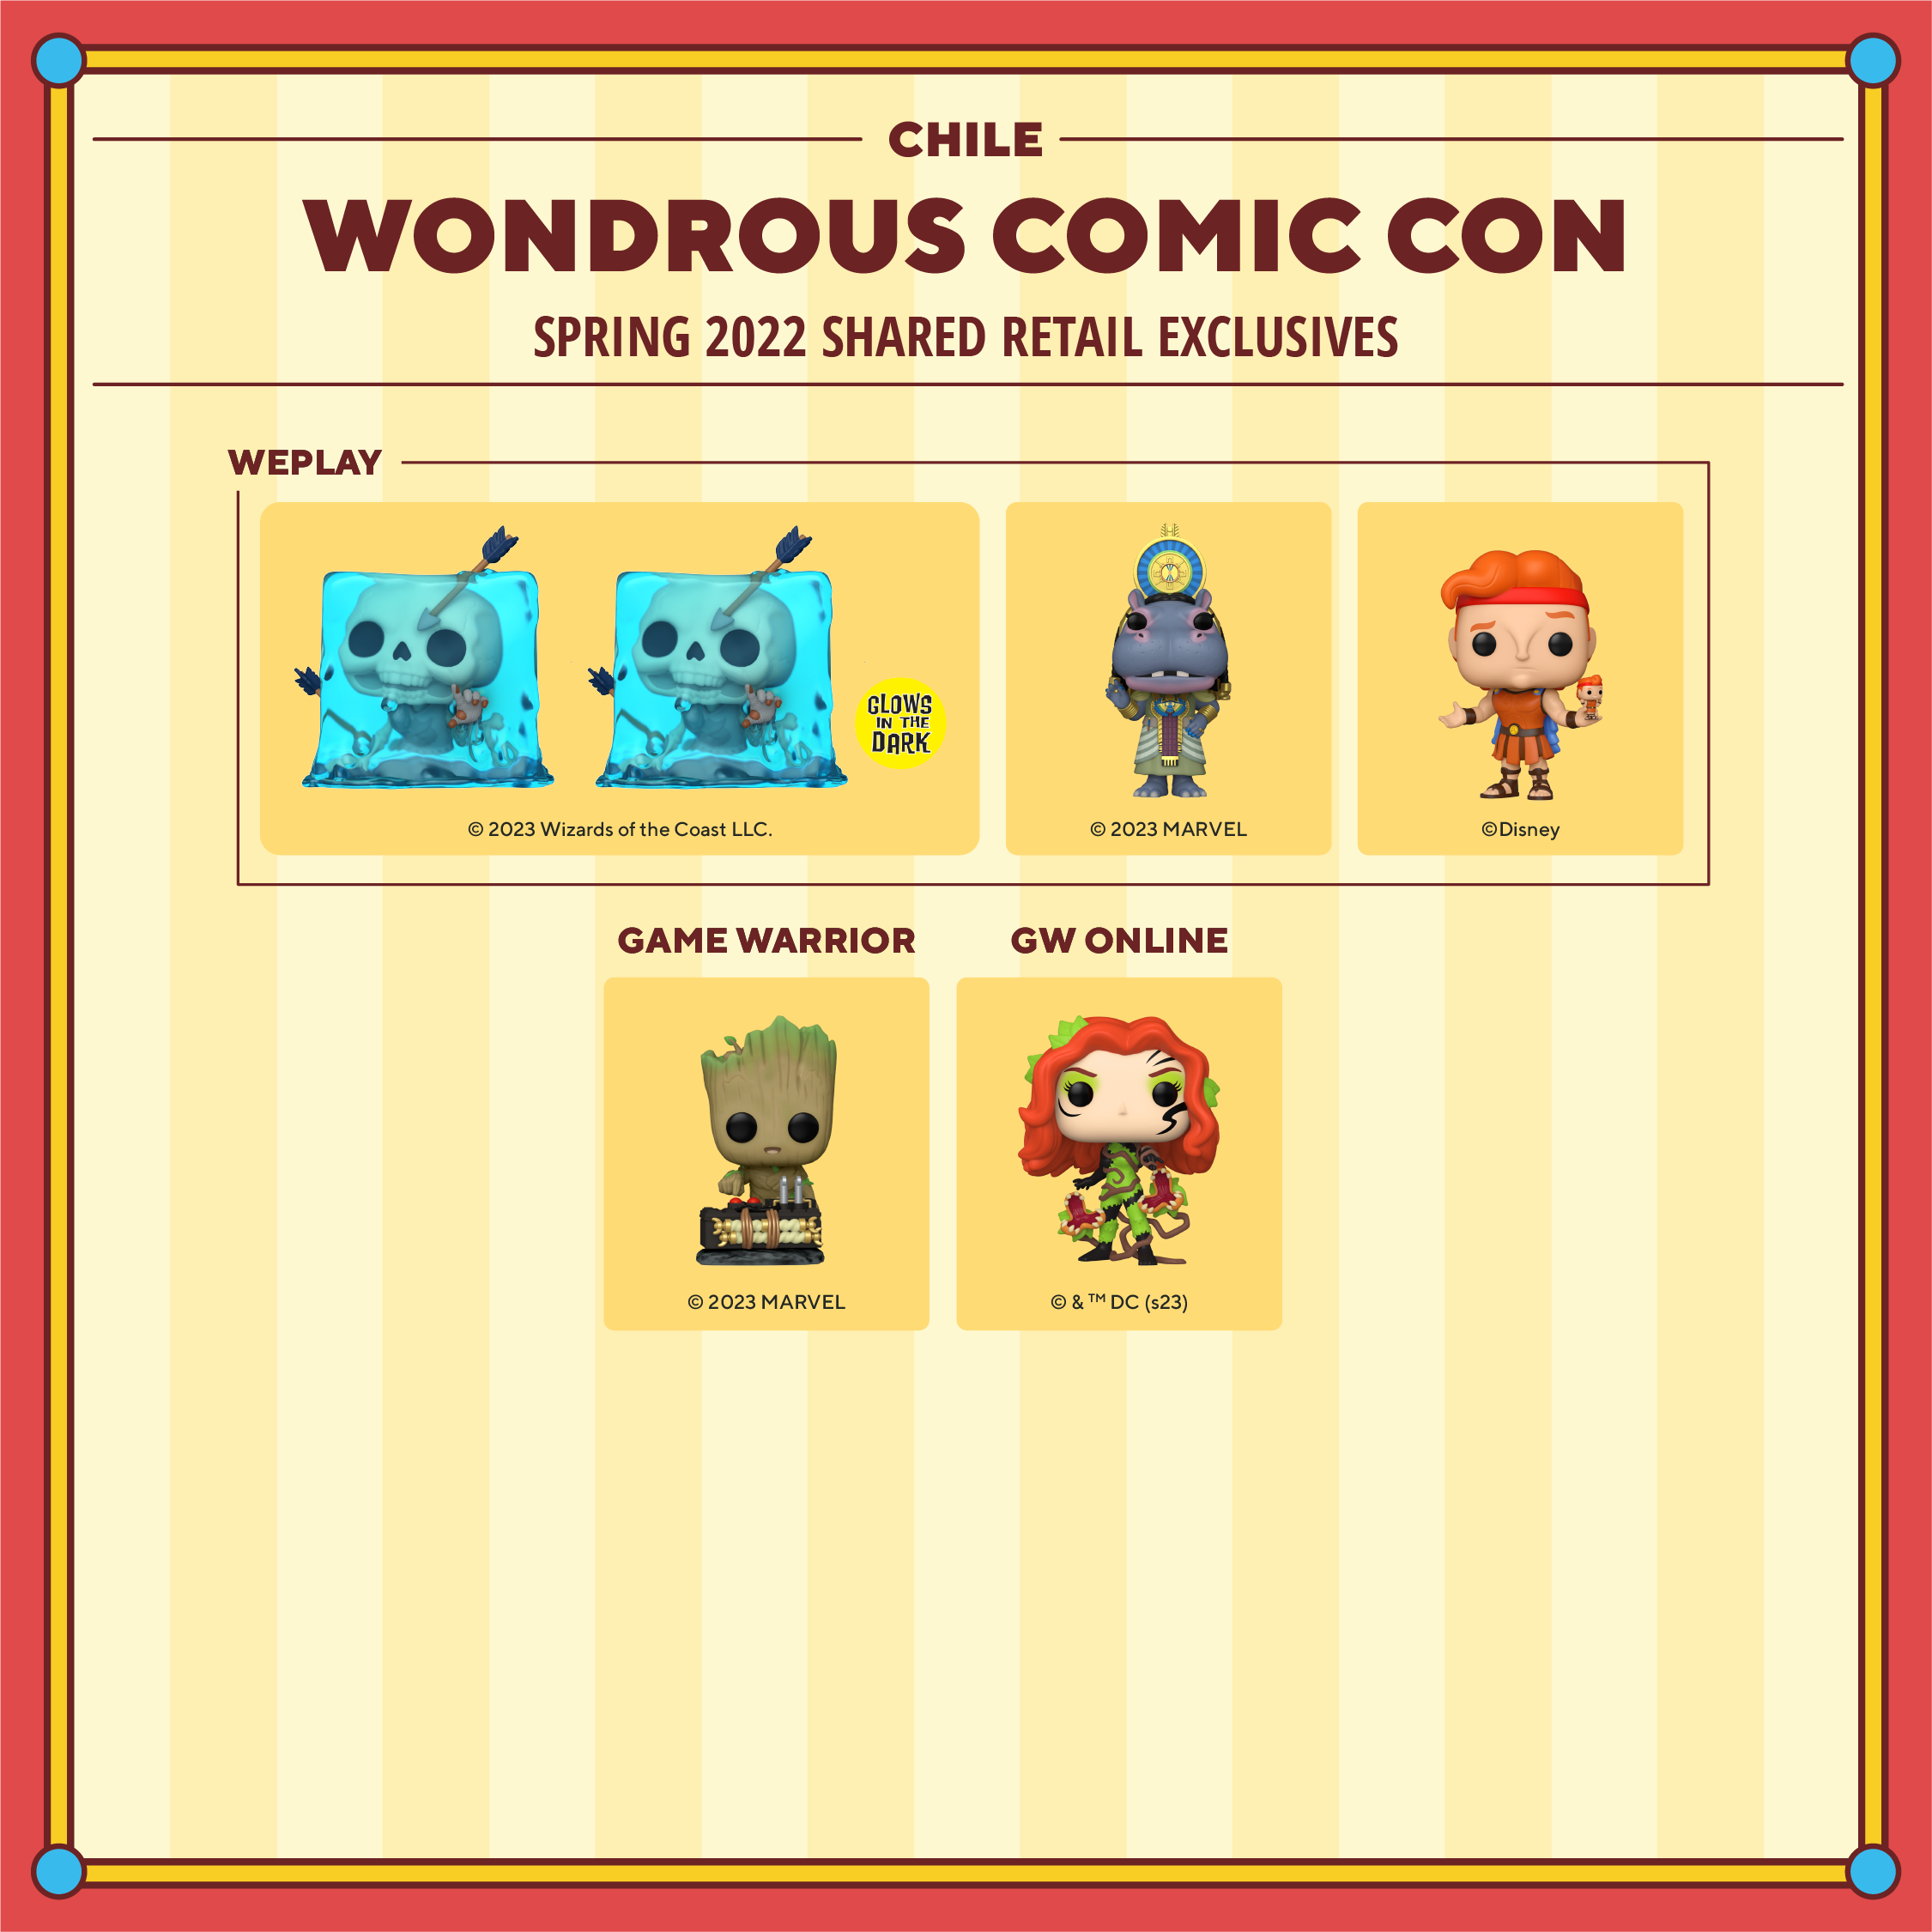 2023 WonderCon Chile Spring shared retail exclusives. Weplay exclusives include Pop! Gelatinous Cube, glow-in-the-dark Pop! Gelatinous Cube, Pop! Taweret, and Pop! Hercules with Action Figure. Game Warrior exclusives include Pop! Baby Groot with Detonator. GW Online exclusives include Pop! Poison Ivy.  